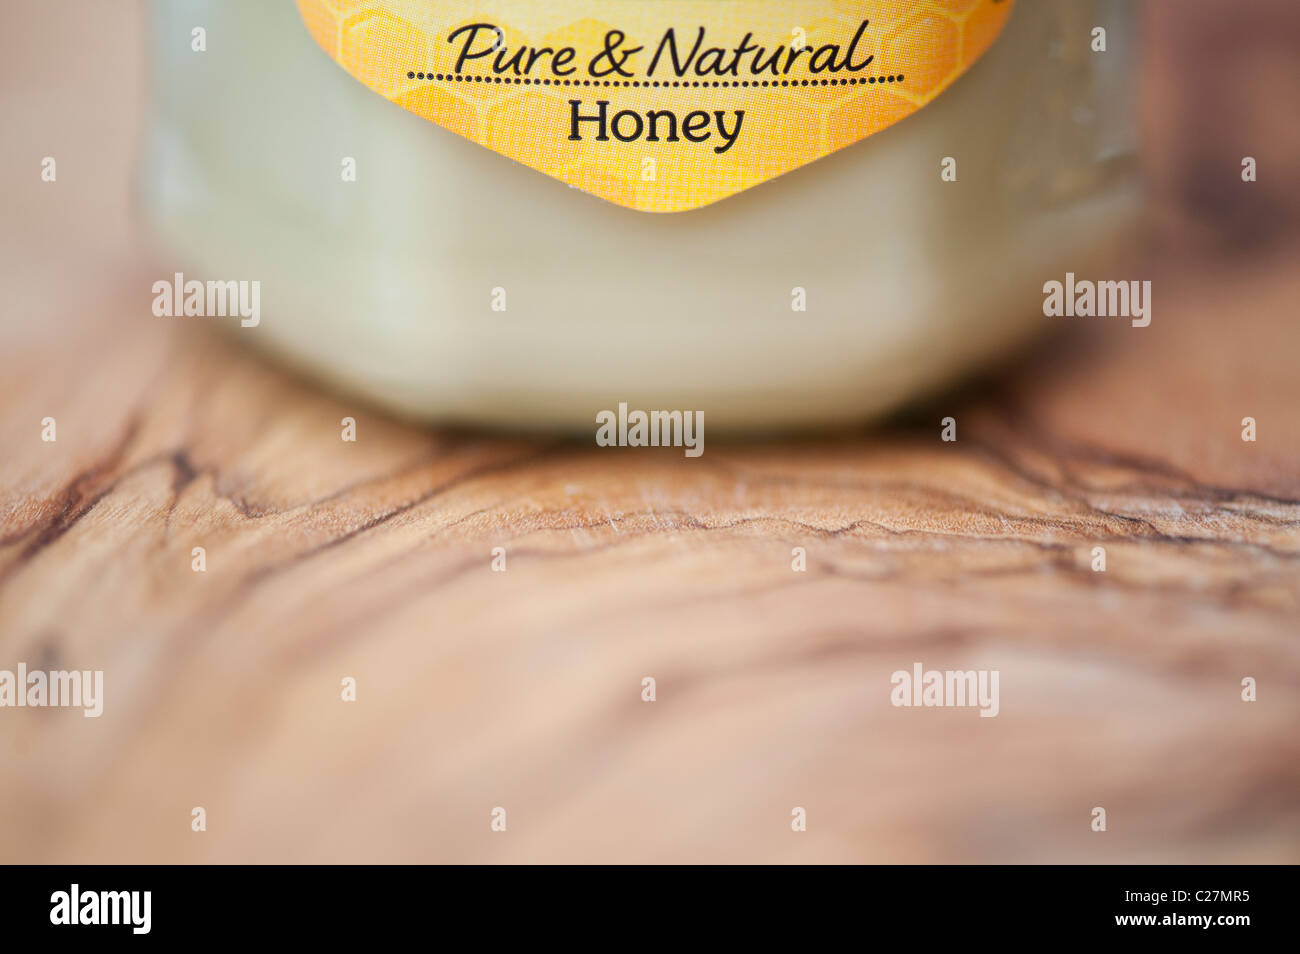 Rowes Pure natural honey jar on olive wood board Stock Photo